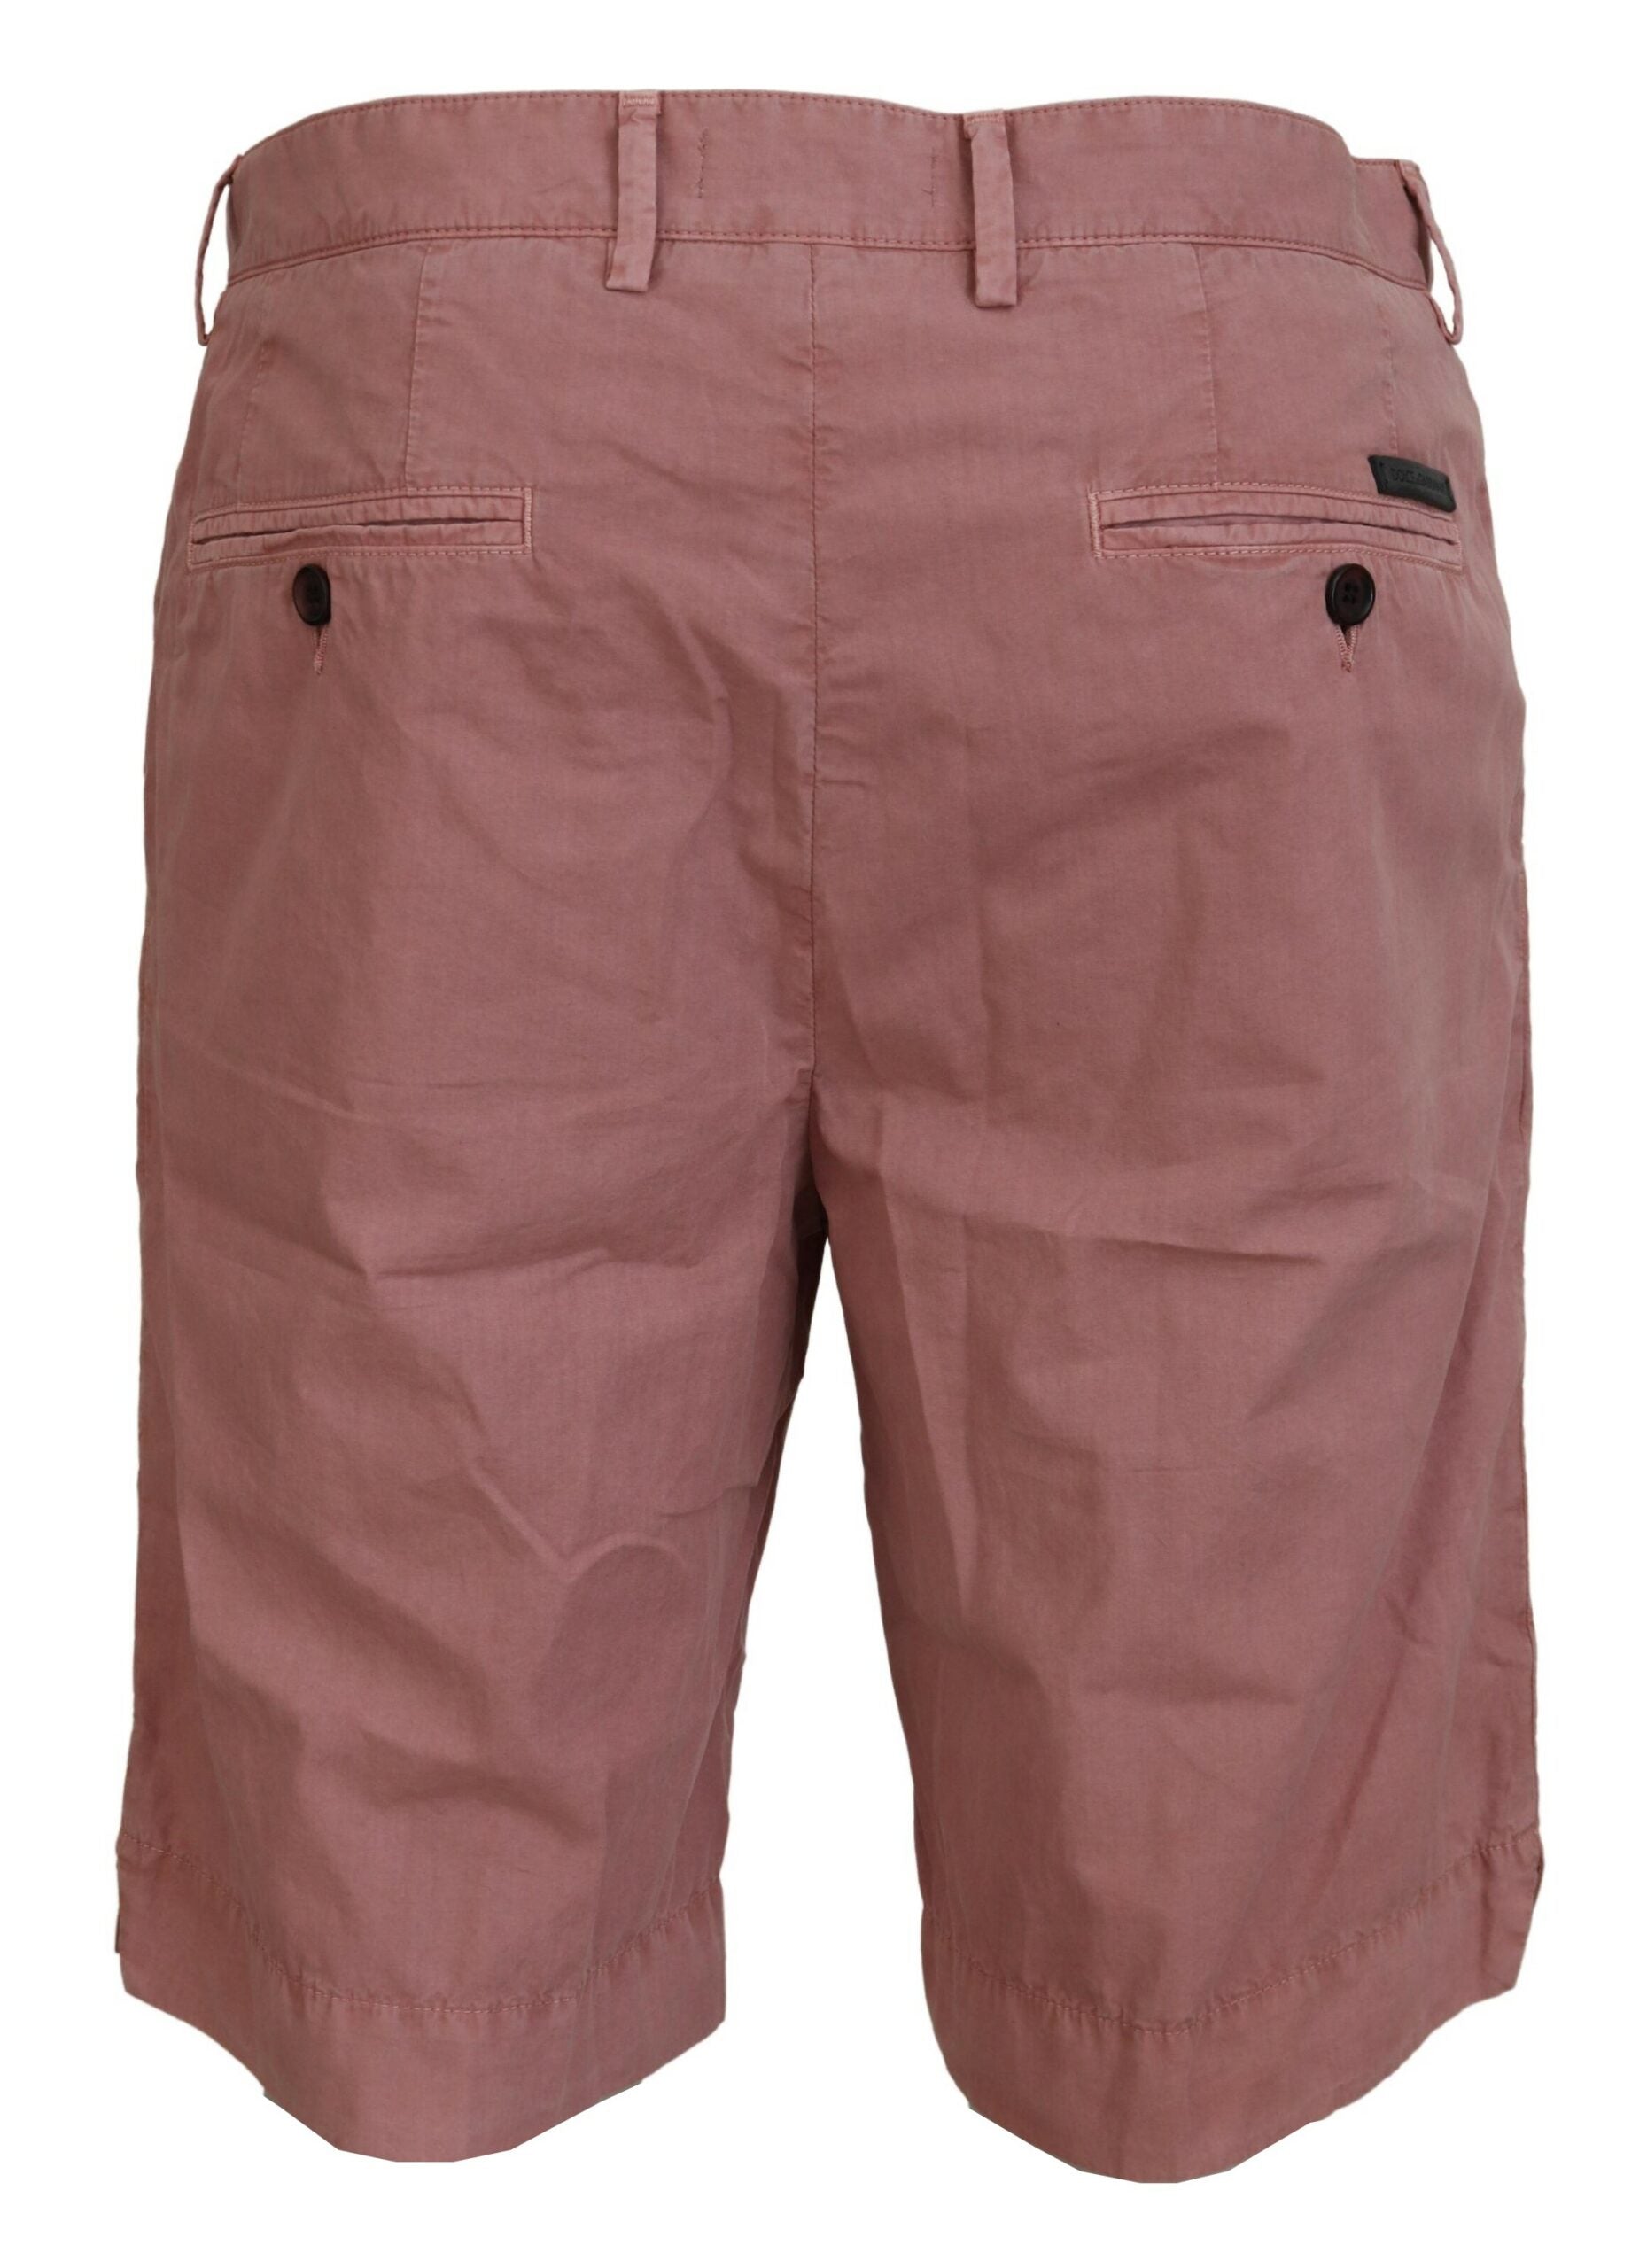 Exquisite Pink Chino Shorts for Men